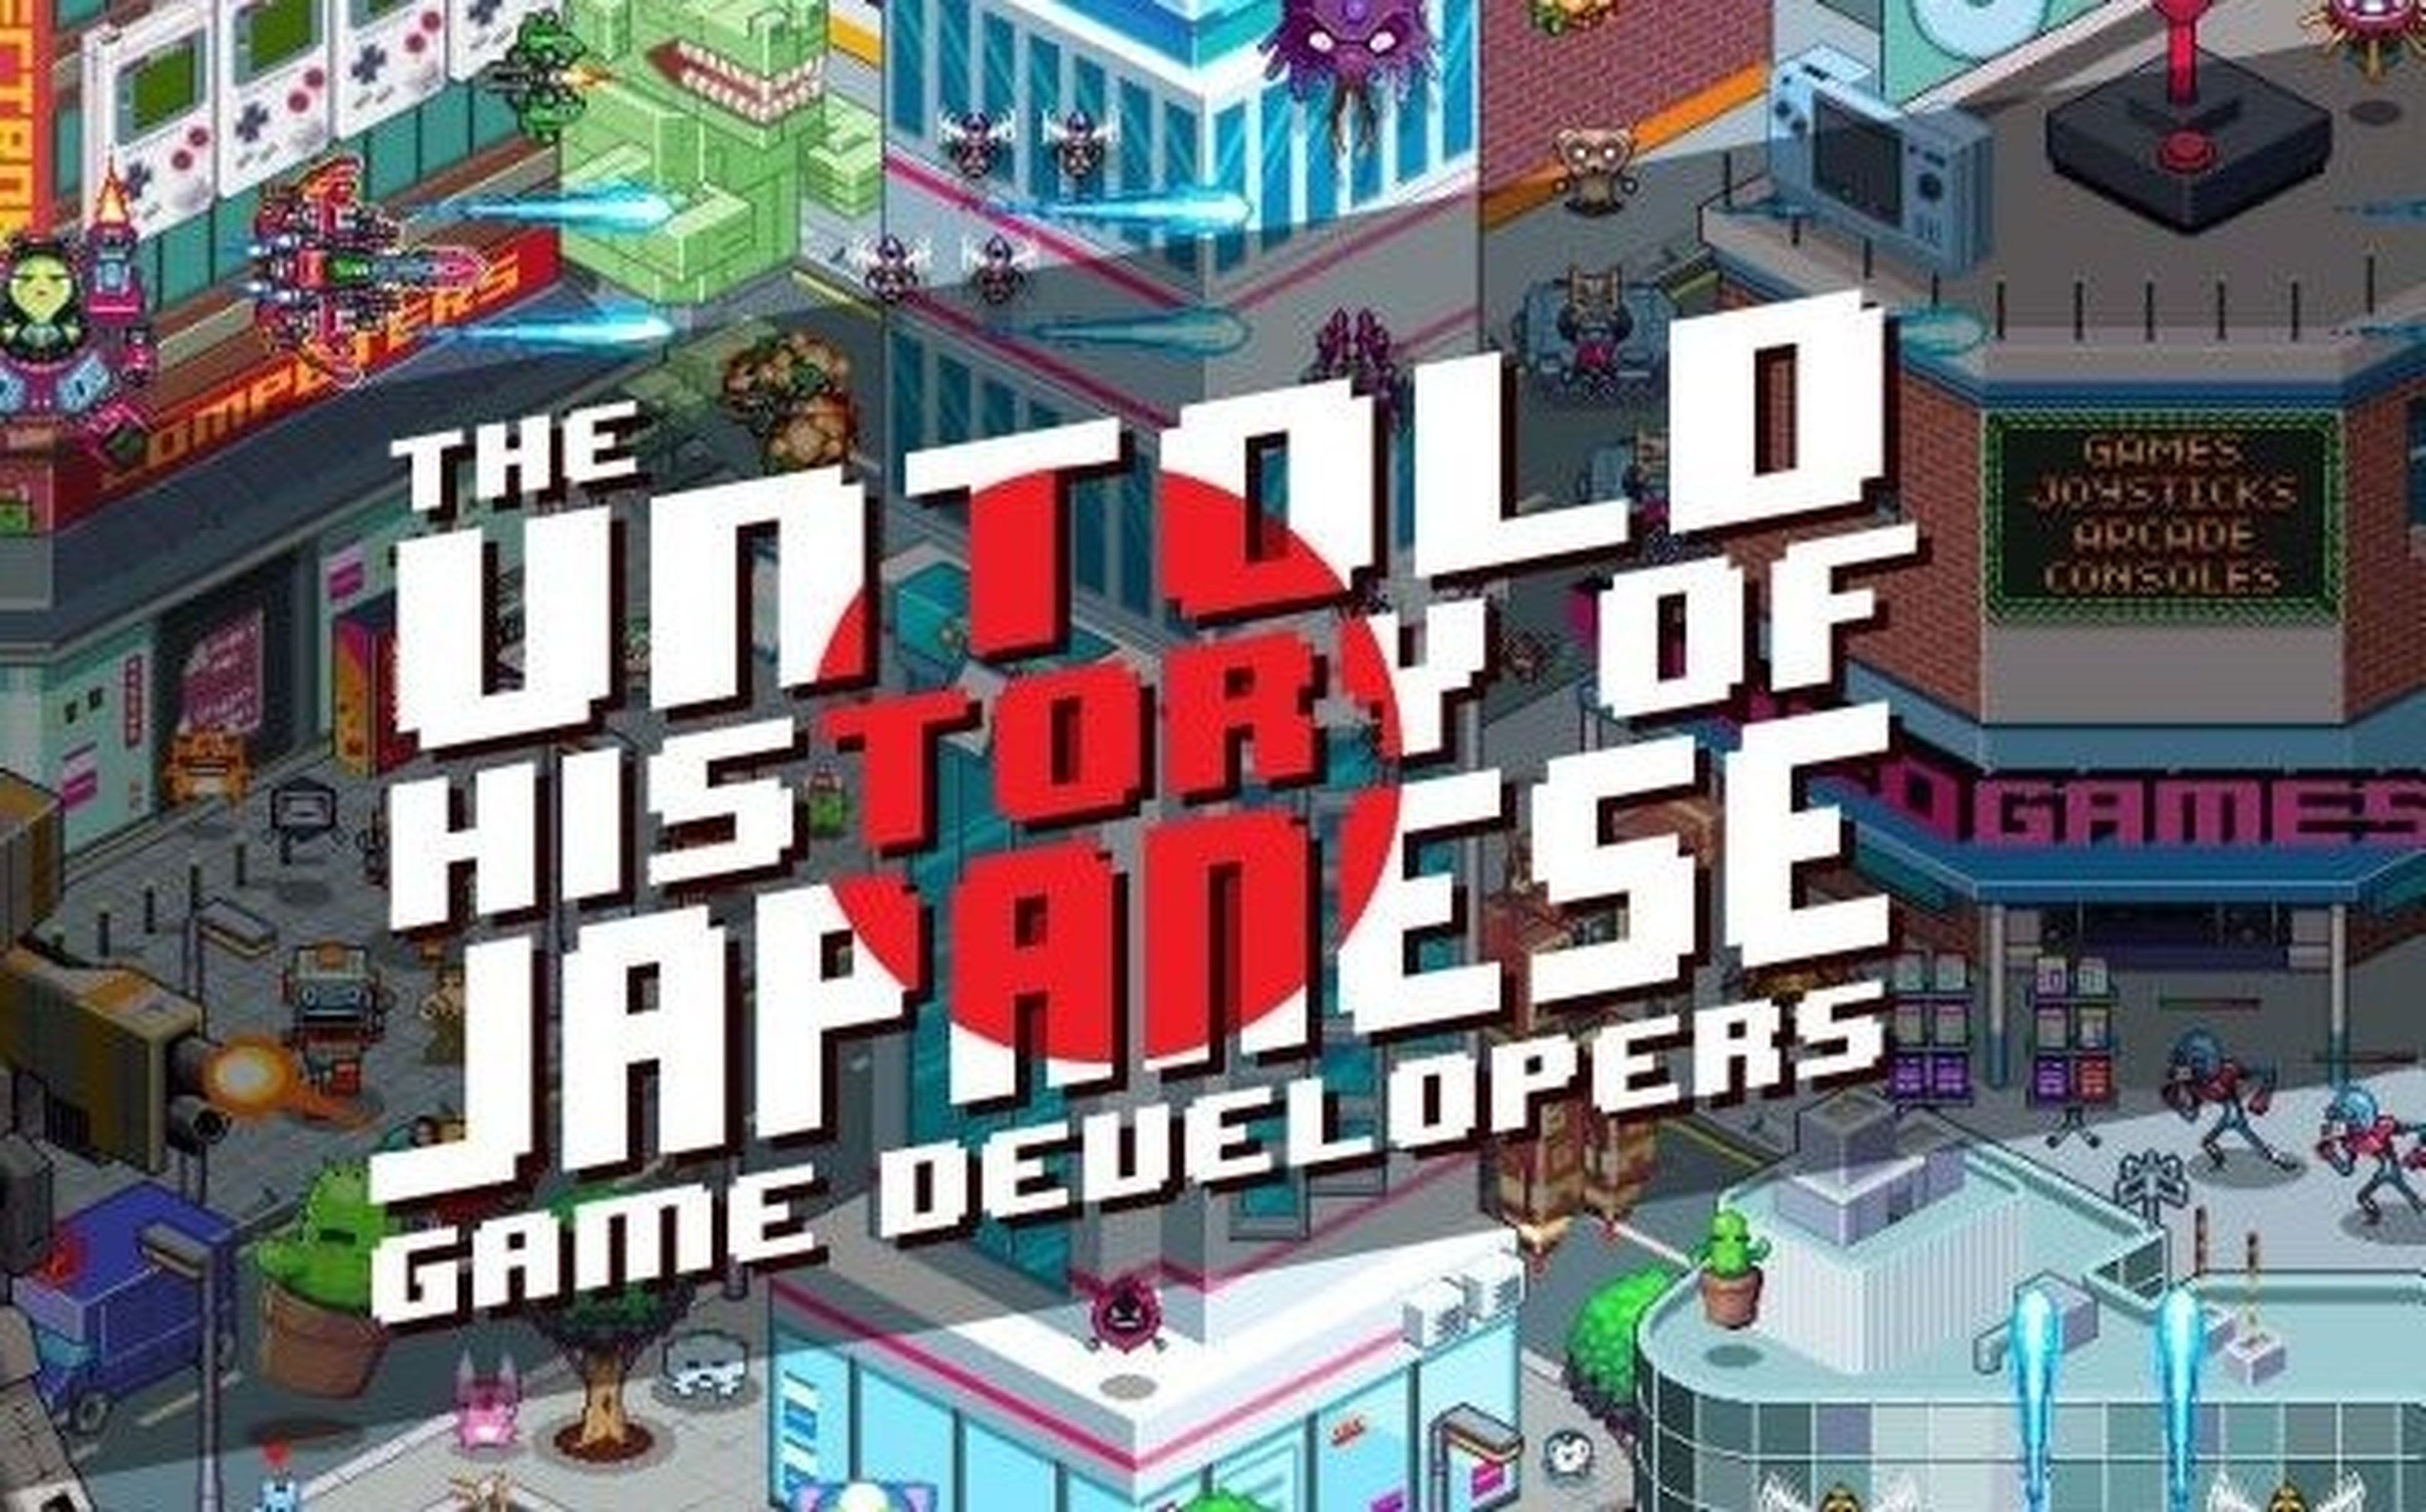 The Untold History of Japanese Game Developers